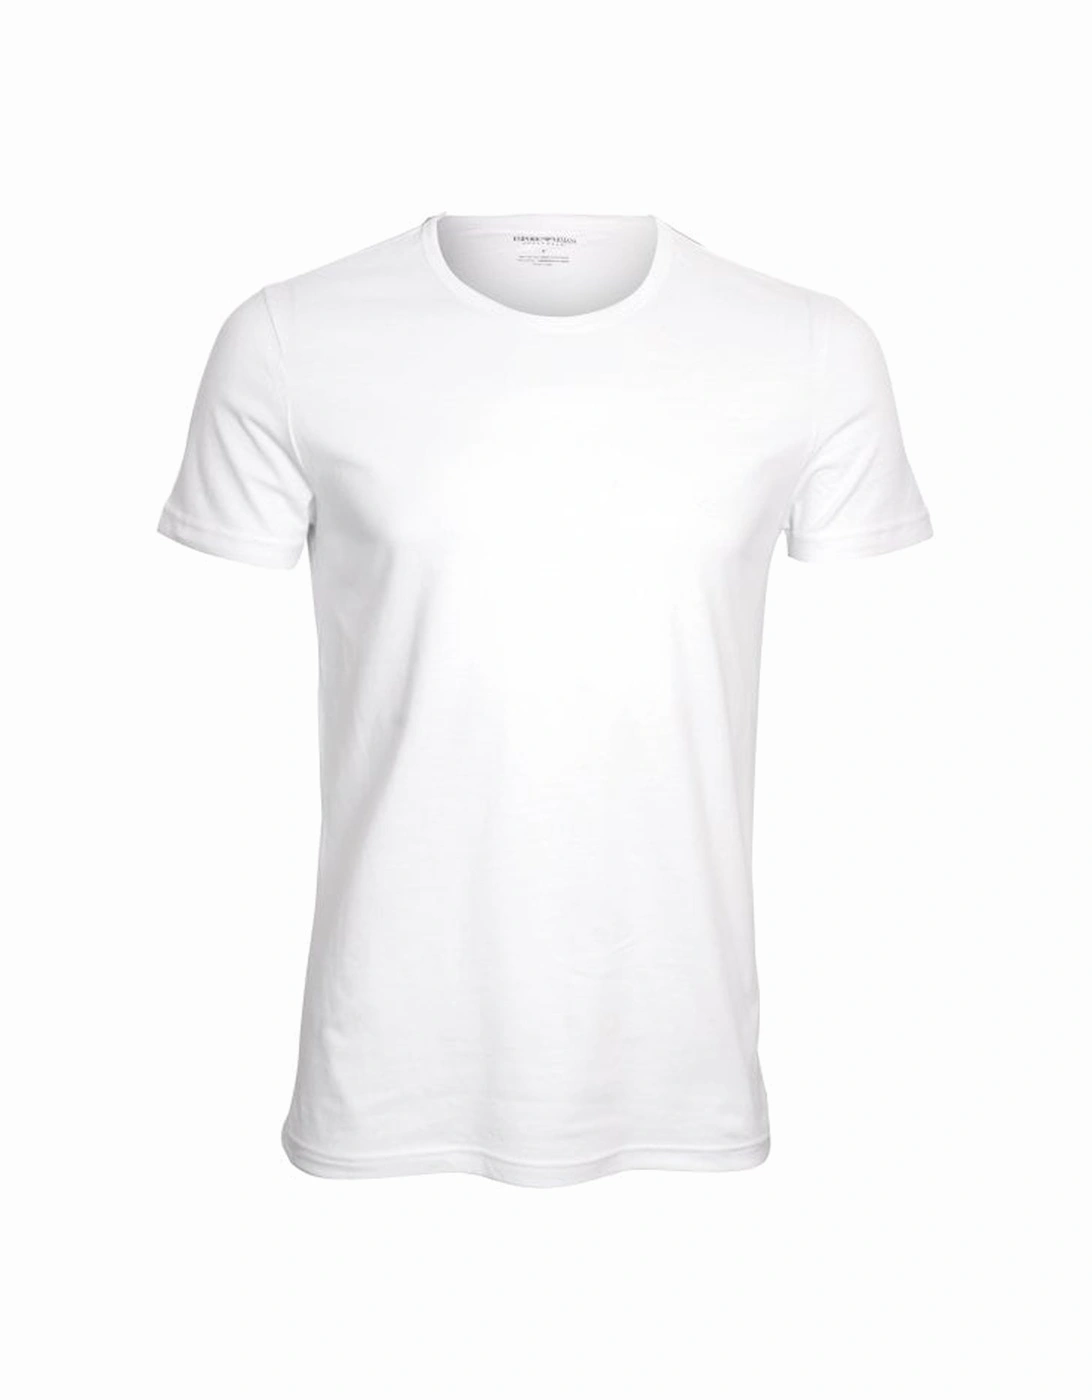 2-Pack Pure Cotton Crew-Neck T-Shirts, White